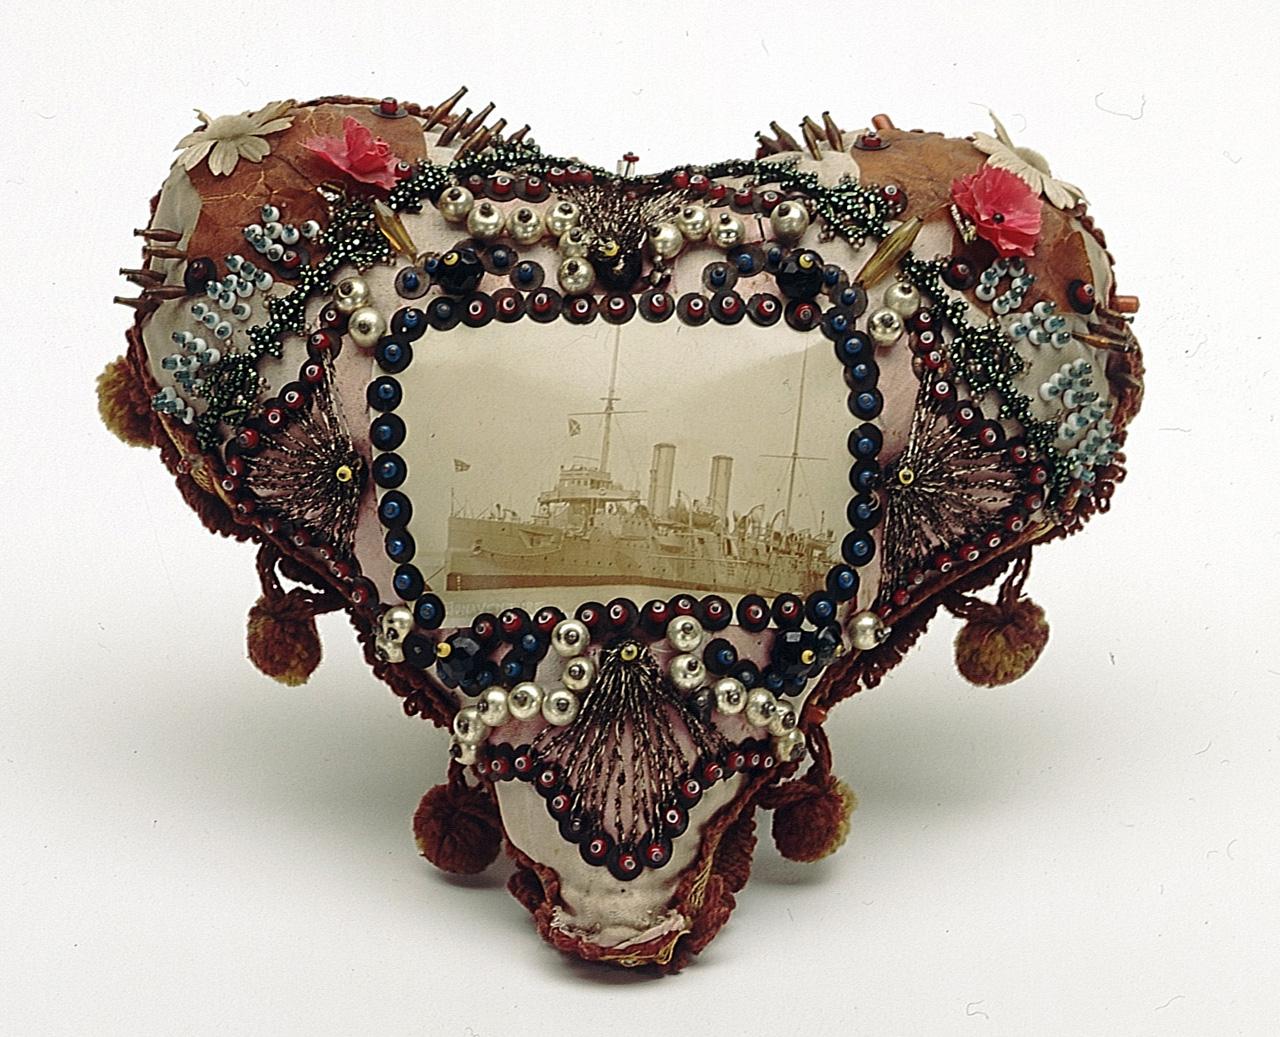 A padded heart-shaped cushion in pink and white silk with a photograph of HMS 'Bonaventure' is mounted in the centre